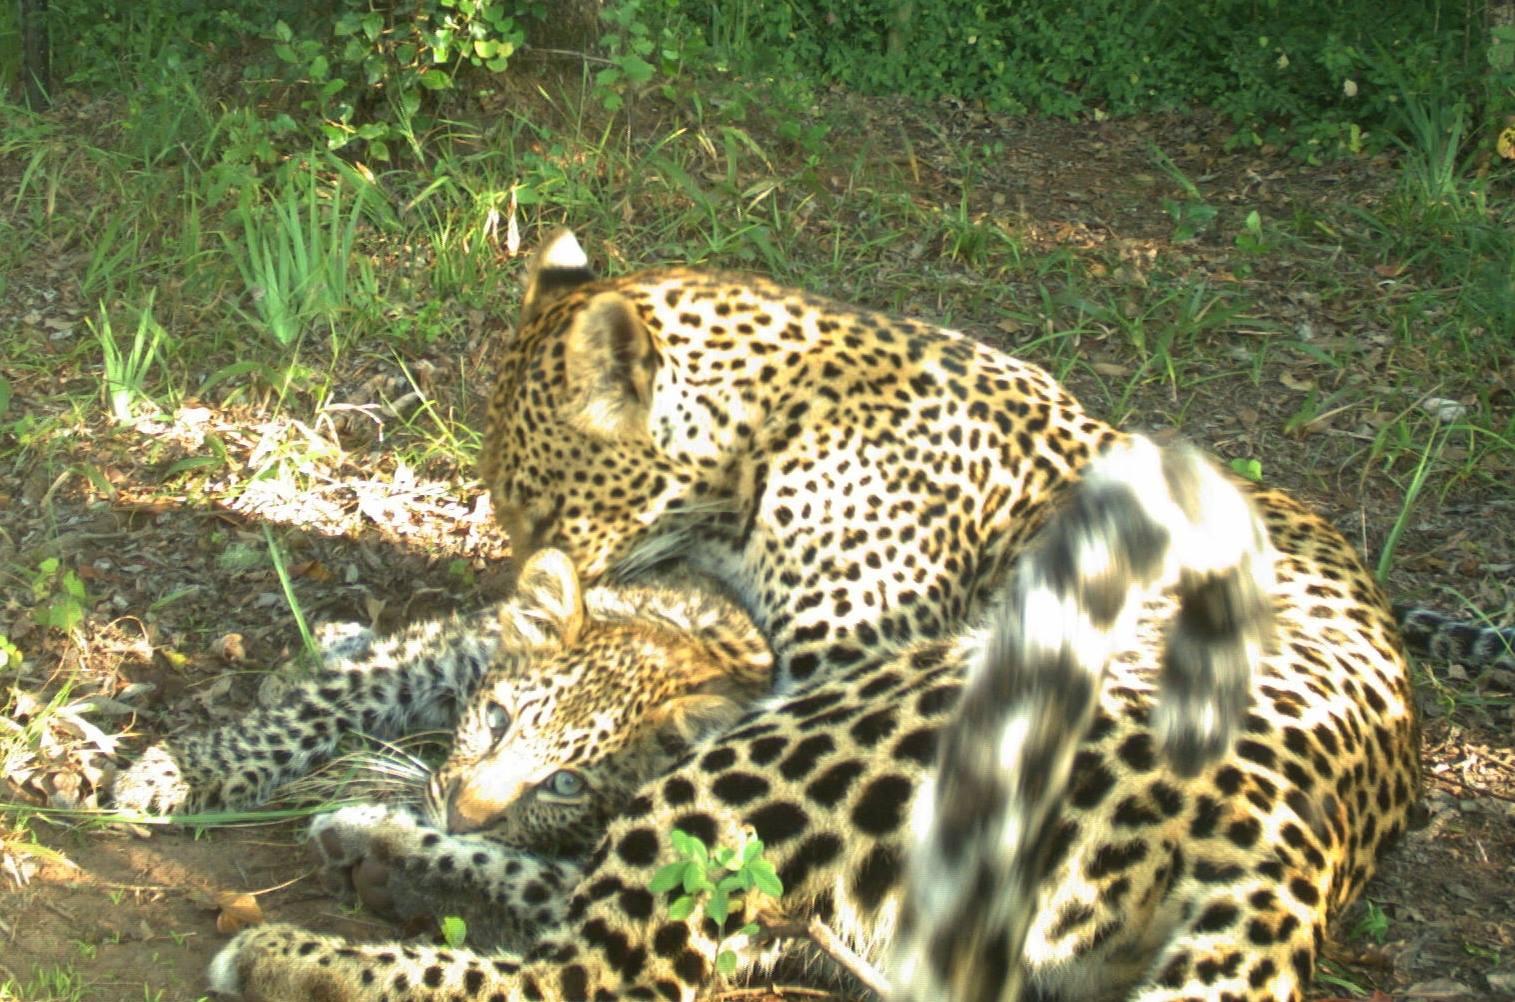 A leopard and cub in the Soutpansberg Mountains, South Africa, where the population has crashed amid illegal hunting